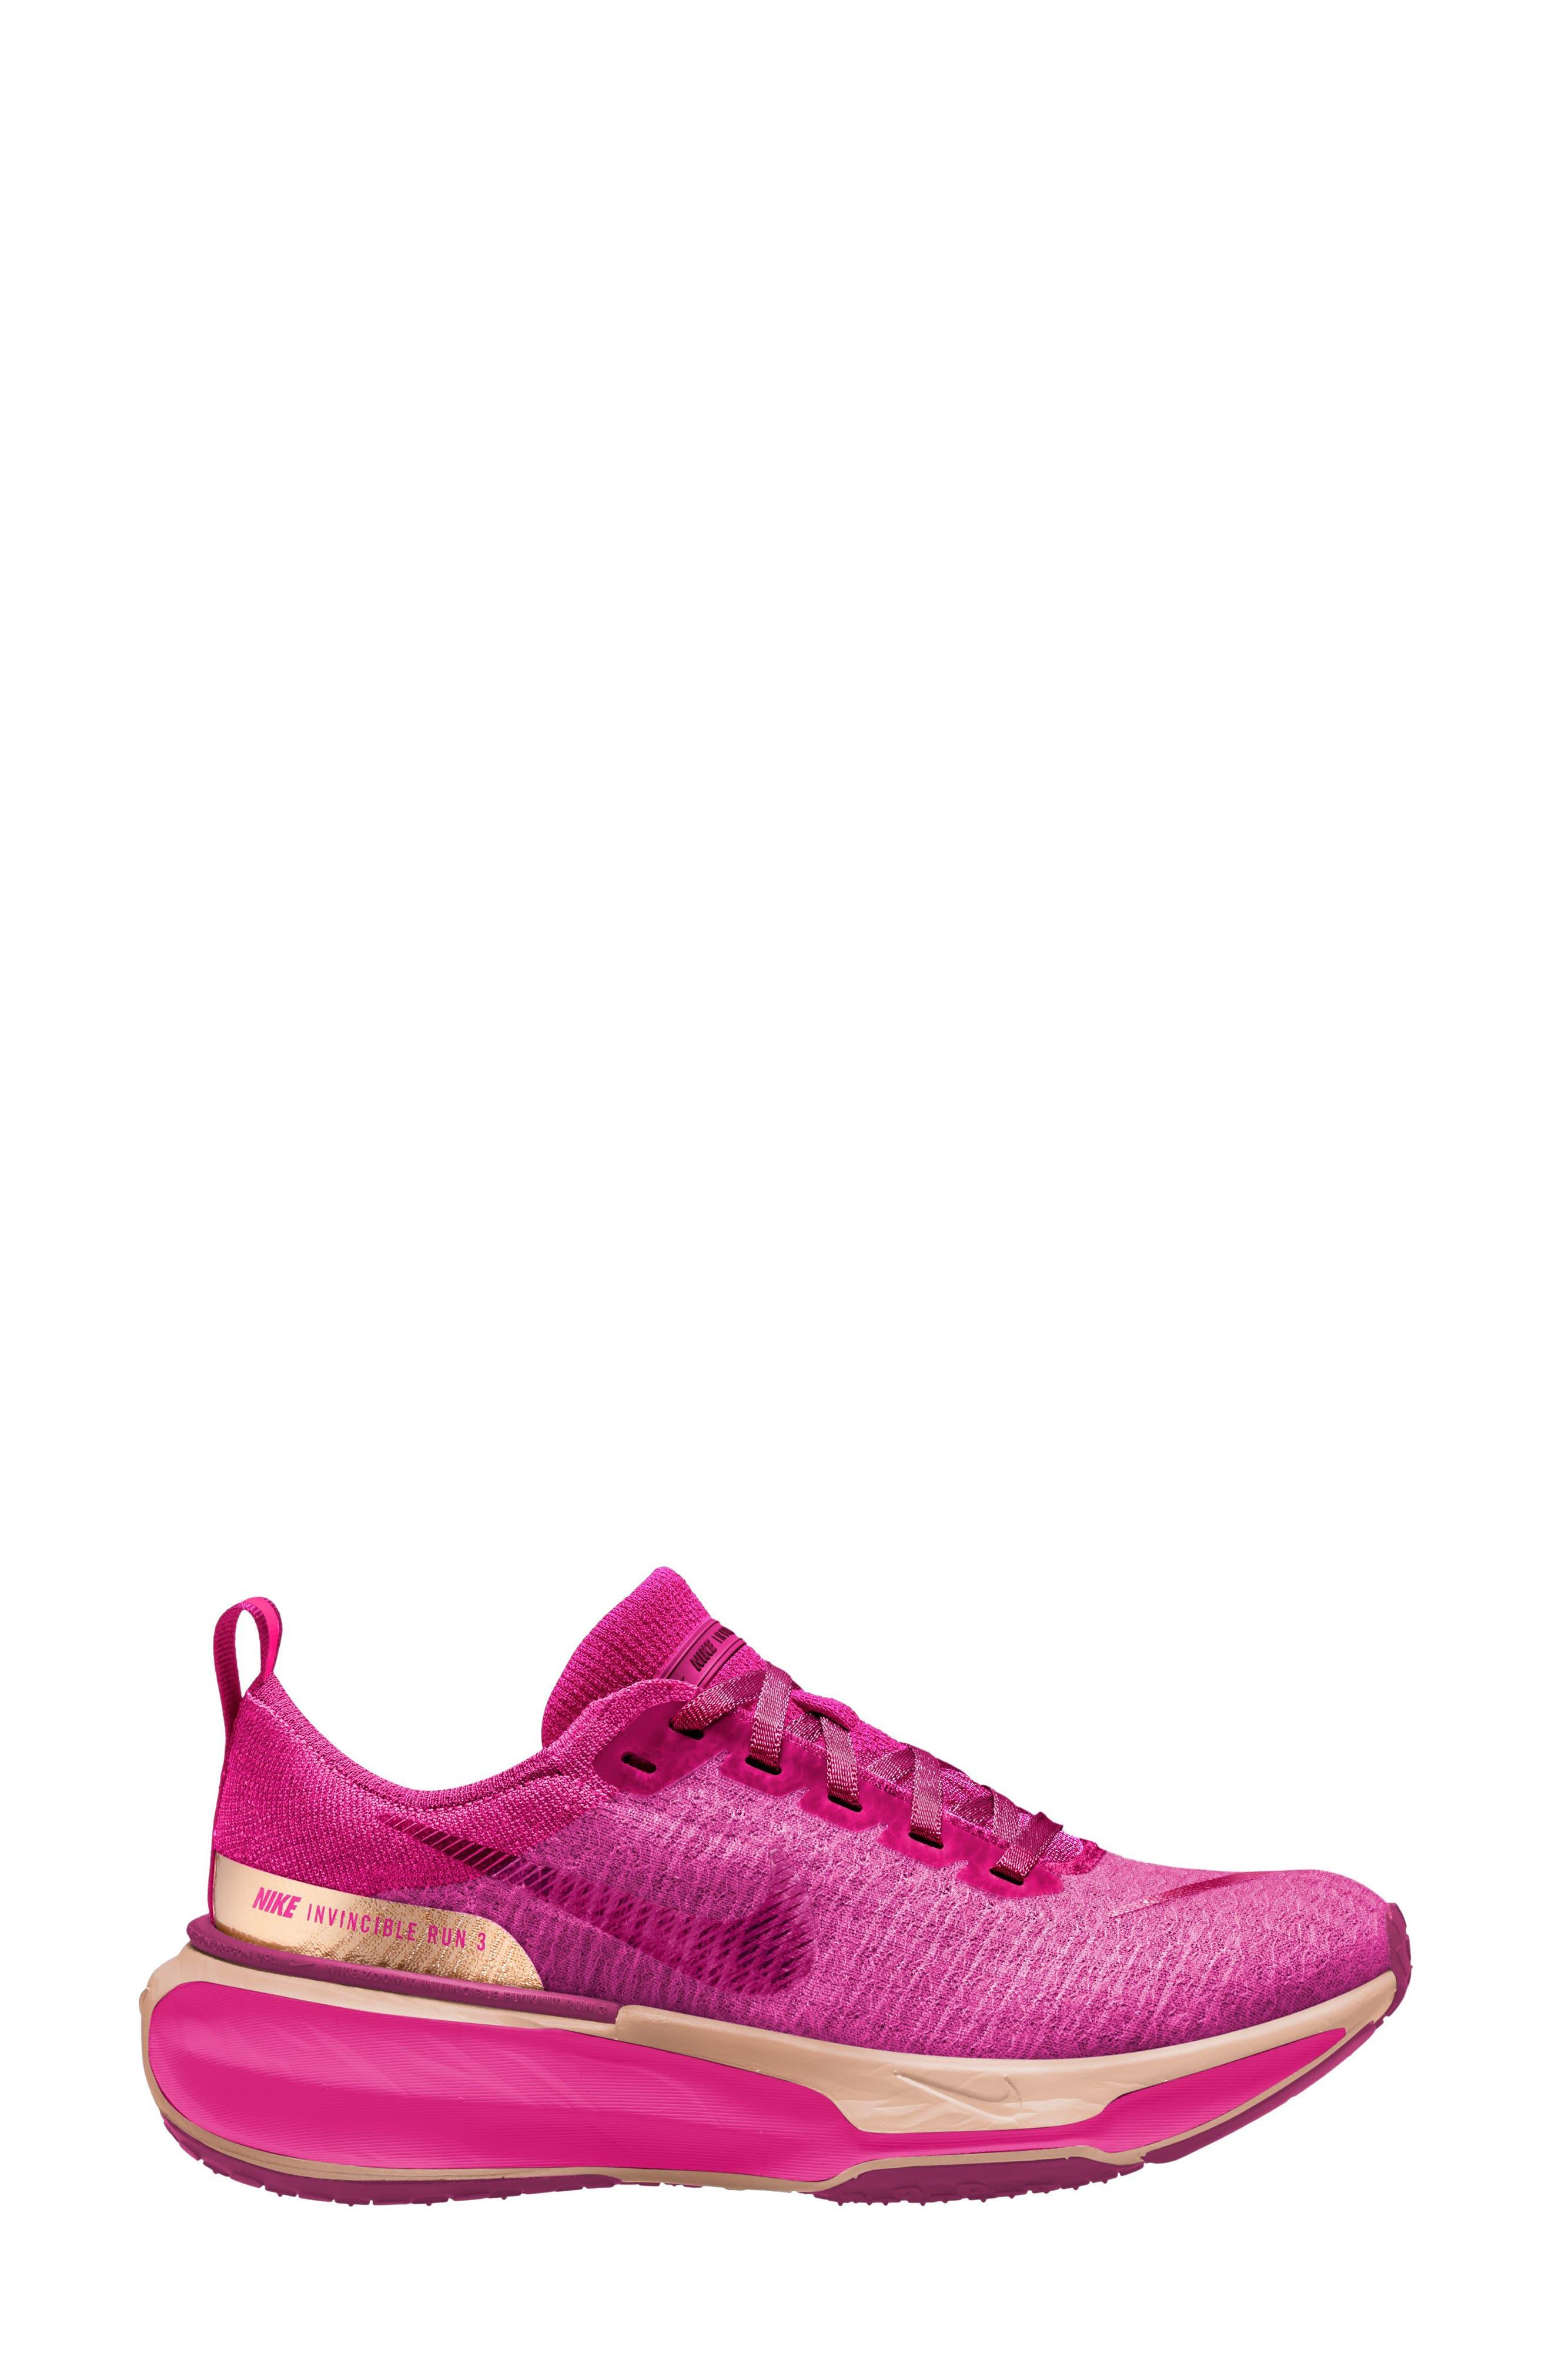 Nike Zoomx Invincible Run 3 Running Shoe in Pink | Lyst